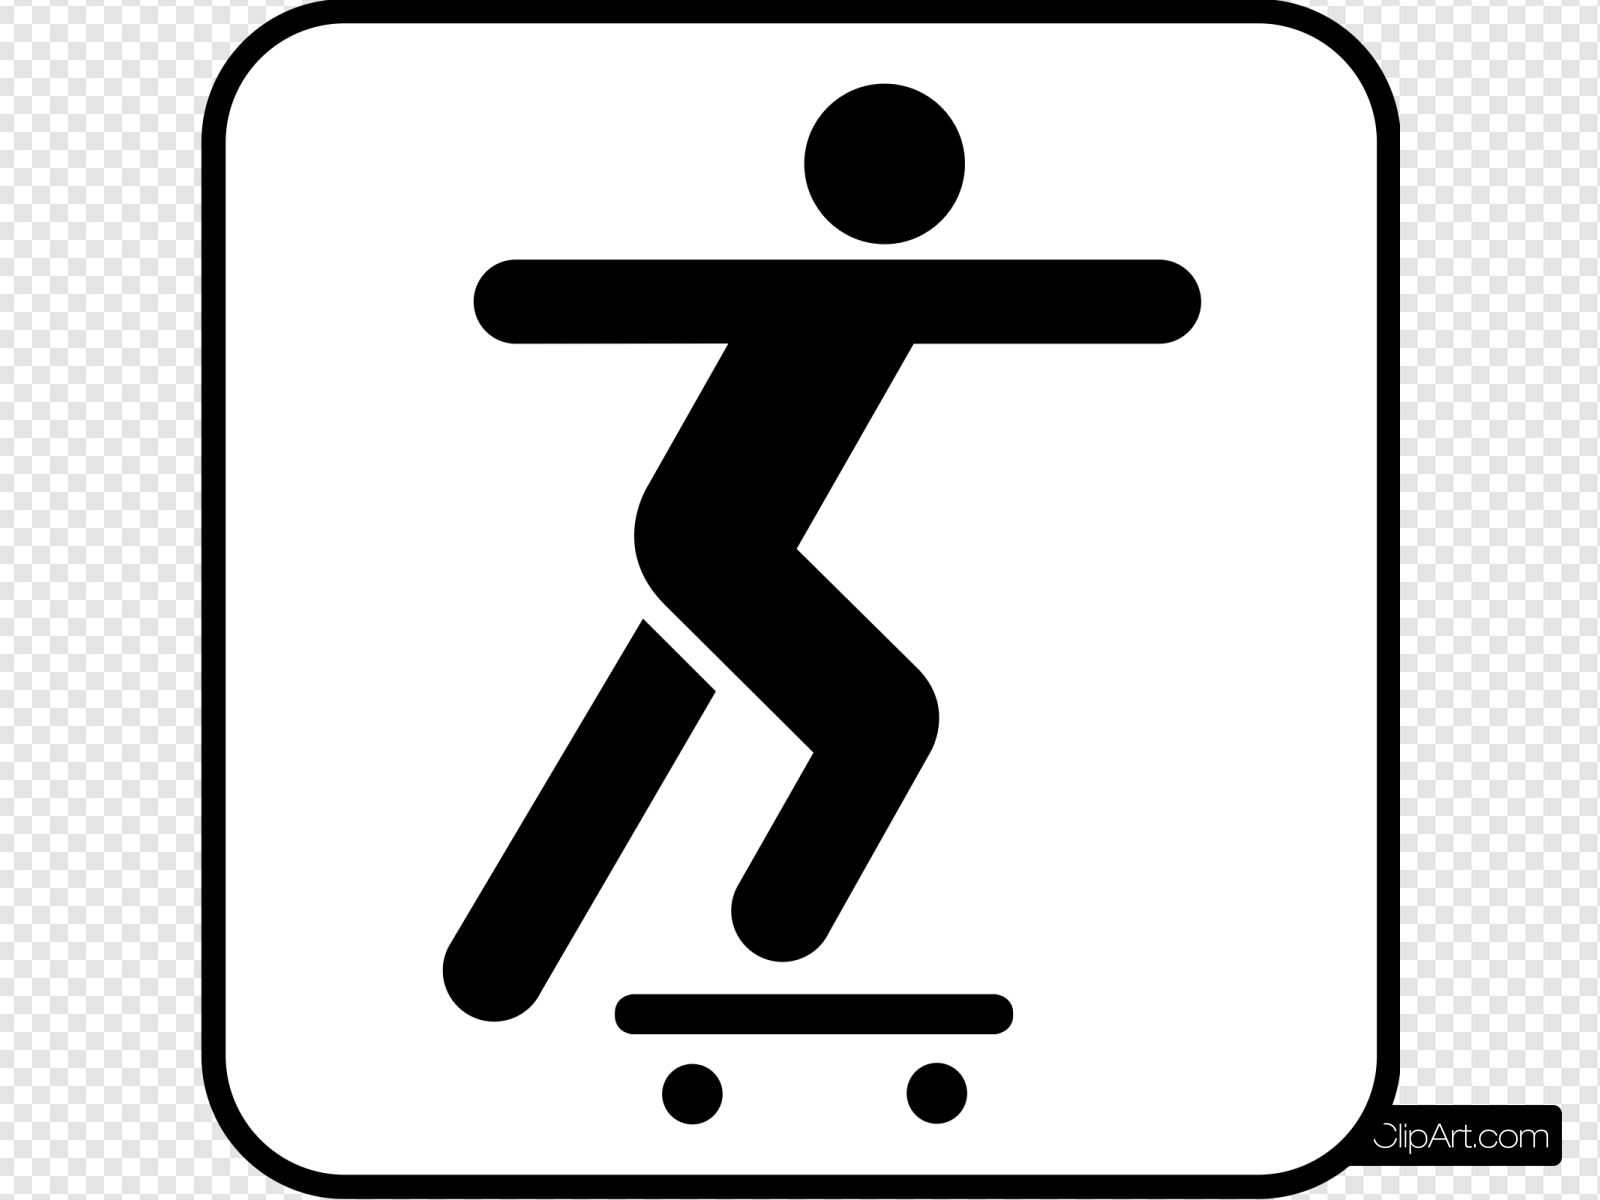 A Person Sliding On A Skate Board Clip art, Icon and SVG.